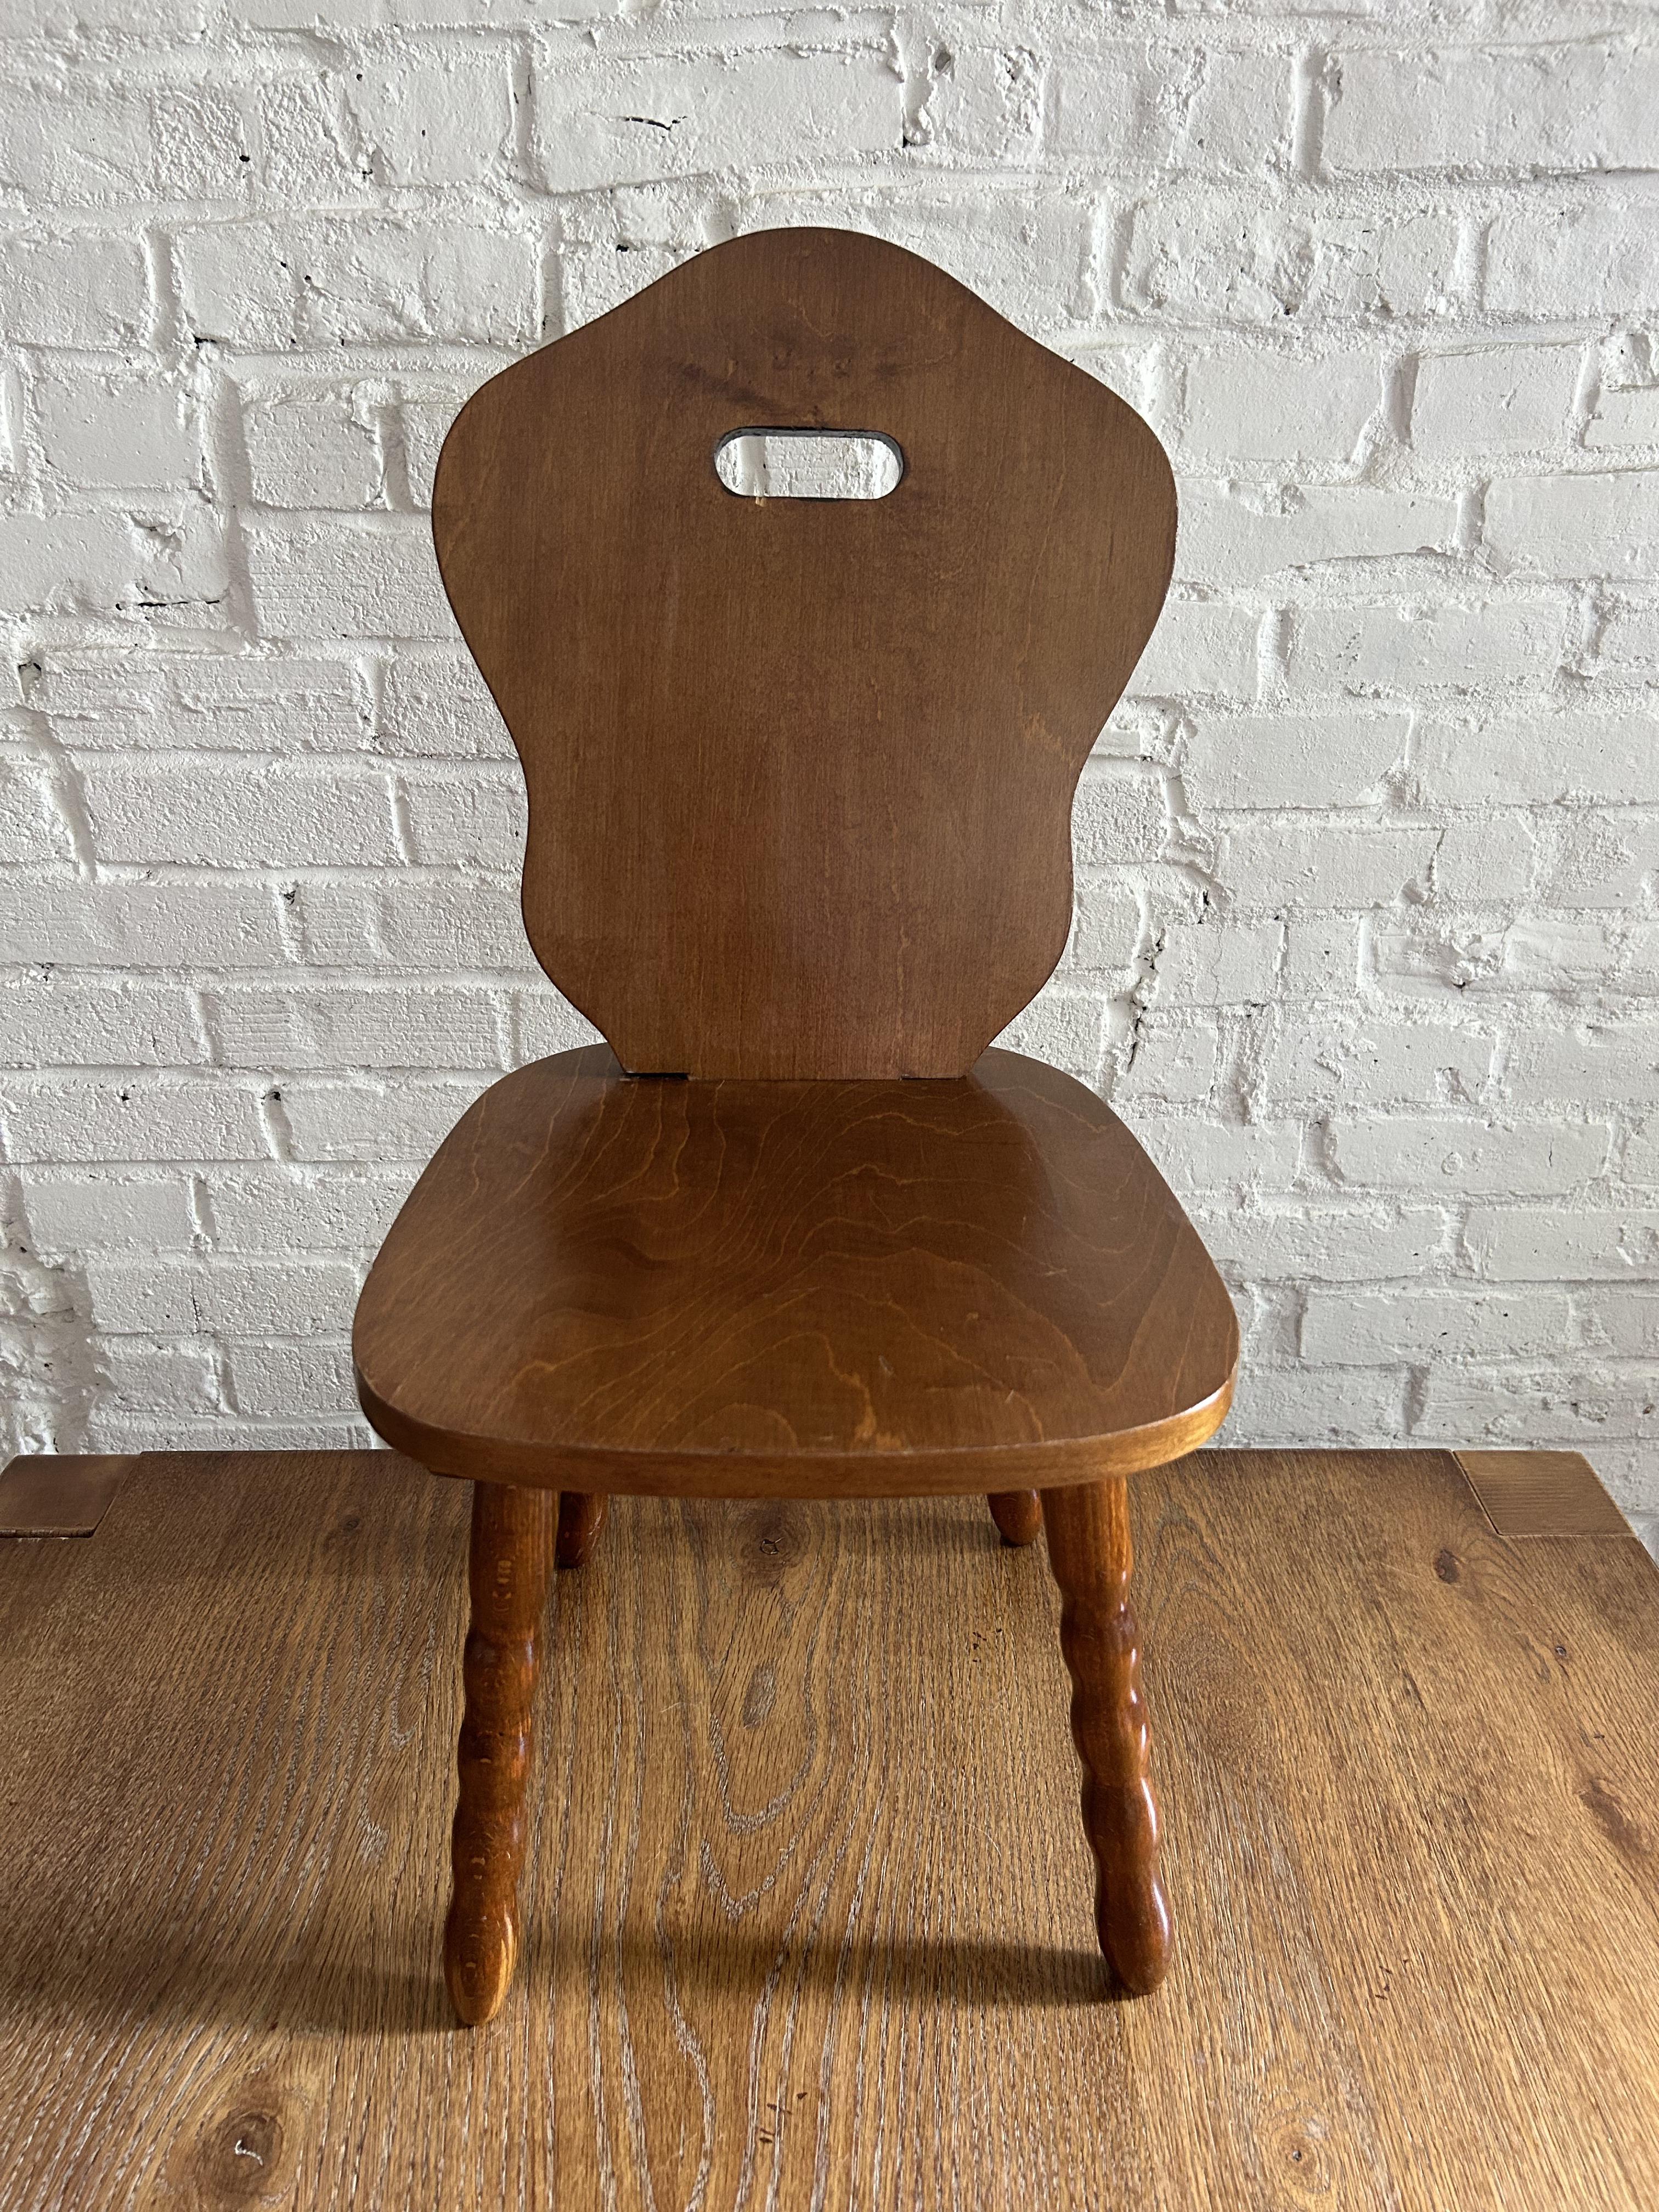 Mid-20th Century 1960s Solid Wood Decorative Stool / Children's Chair, Made in Romania